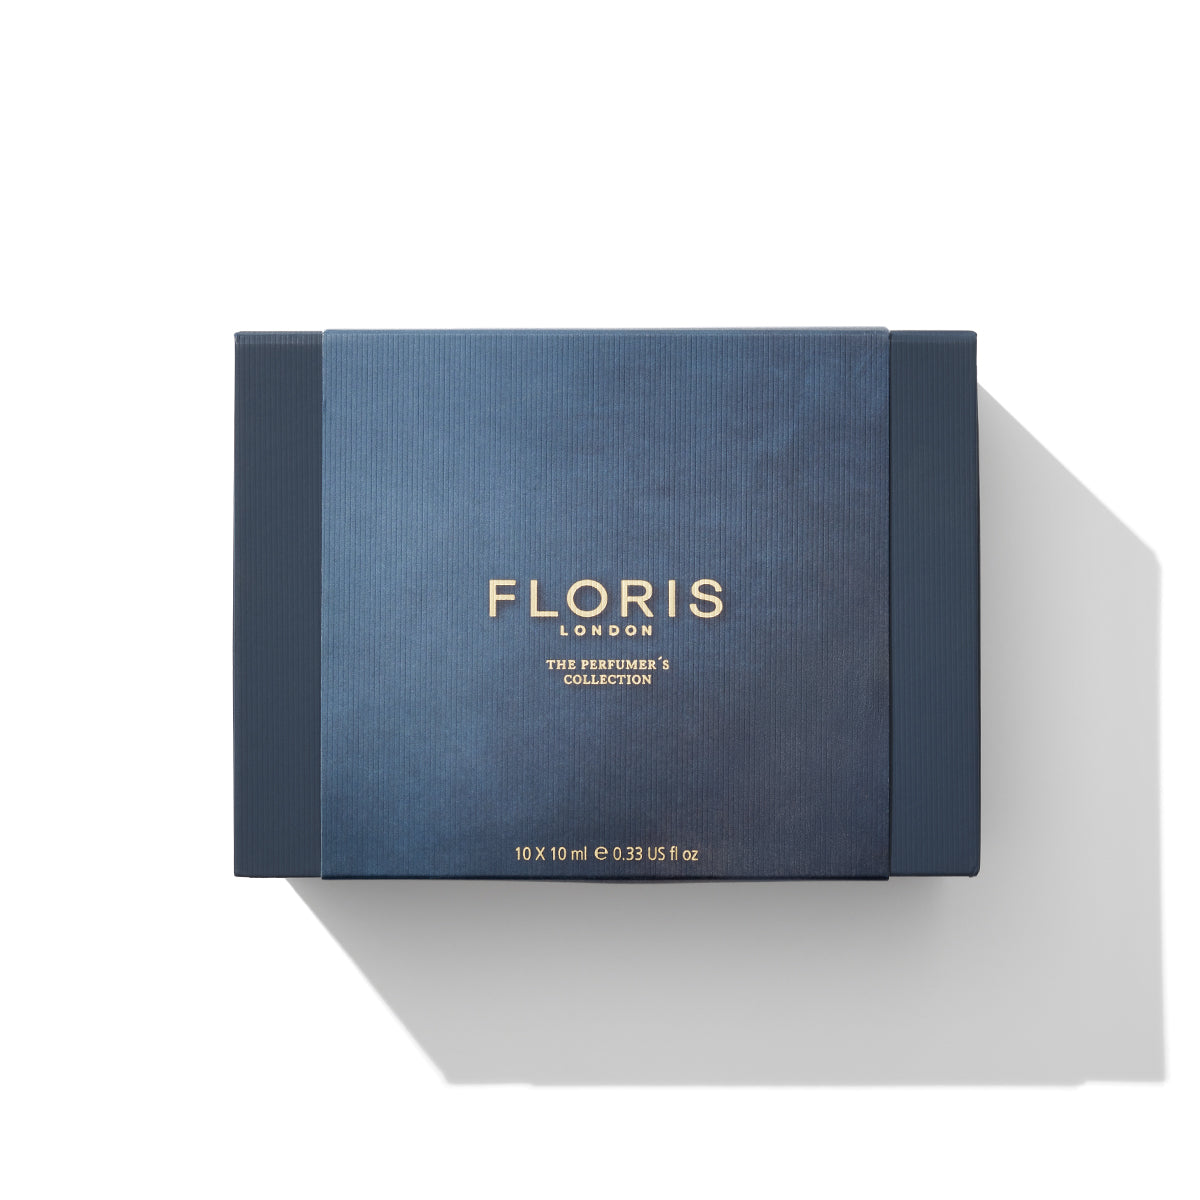 A blue box and sleeve showing The Perfumers Collection